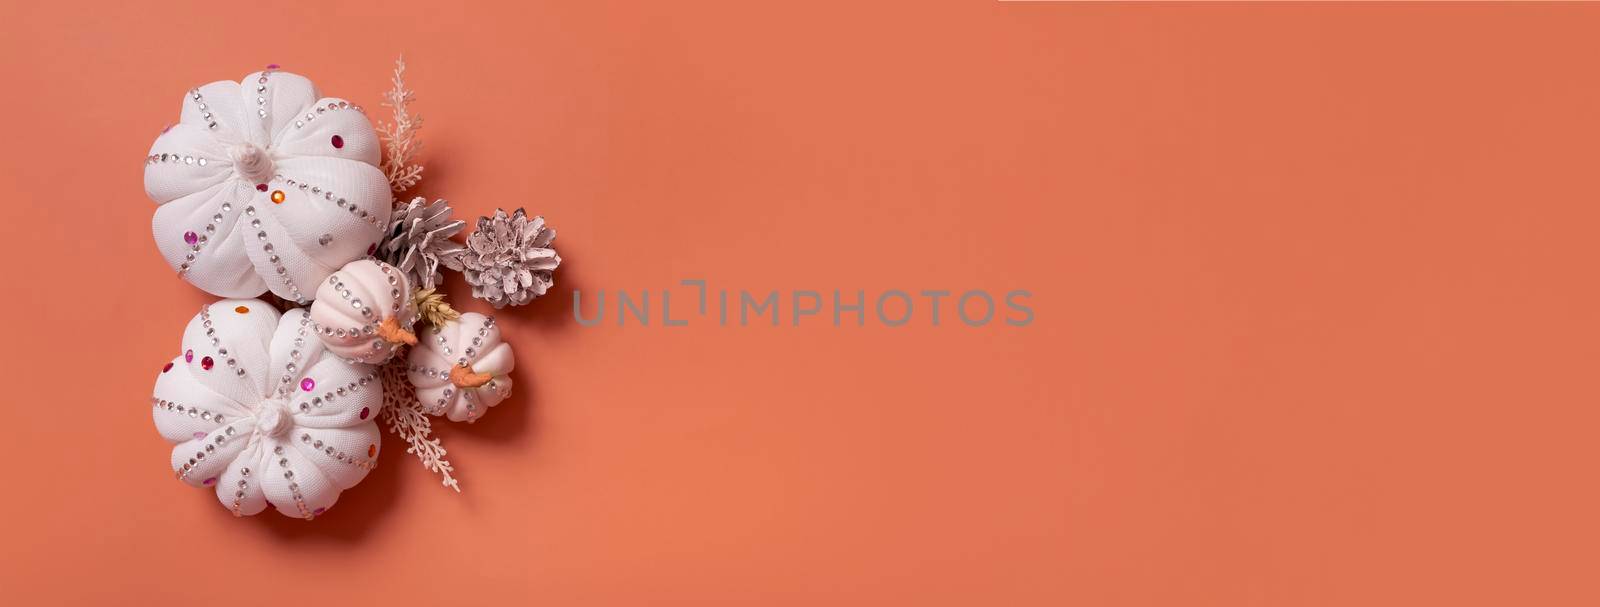 Banner with white decorative hand made pumpkins with shiny stones and pine cones on colored background. Thanksgiving day concept by ssvimaliss